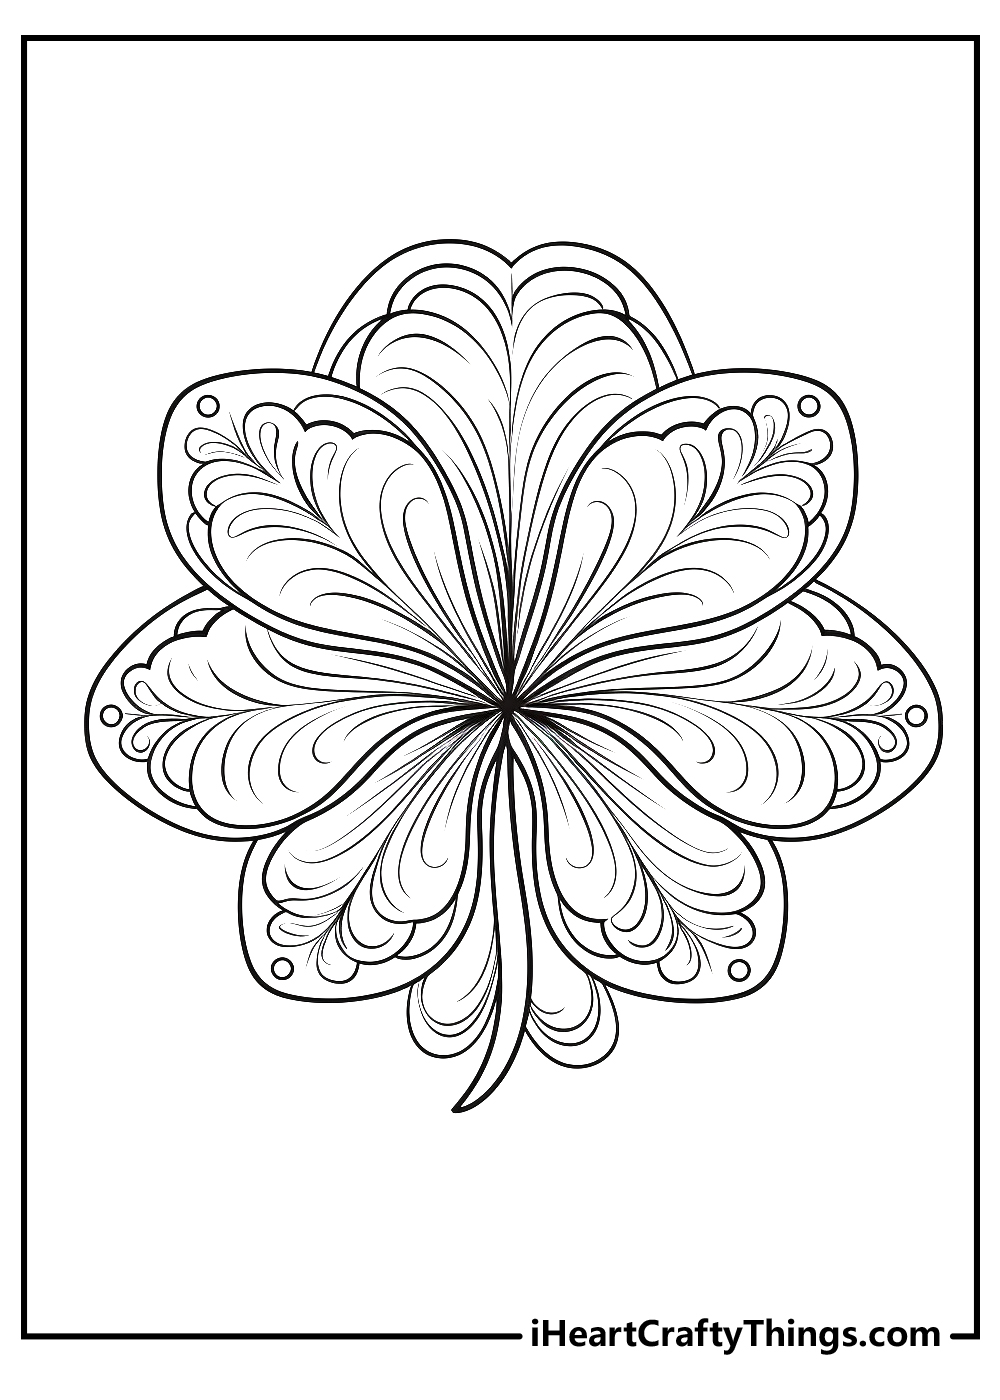 Shamrock Coloring Pages for kids